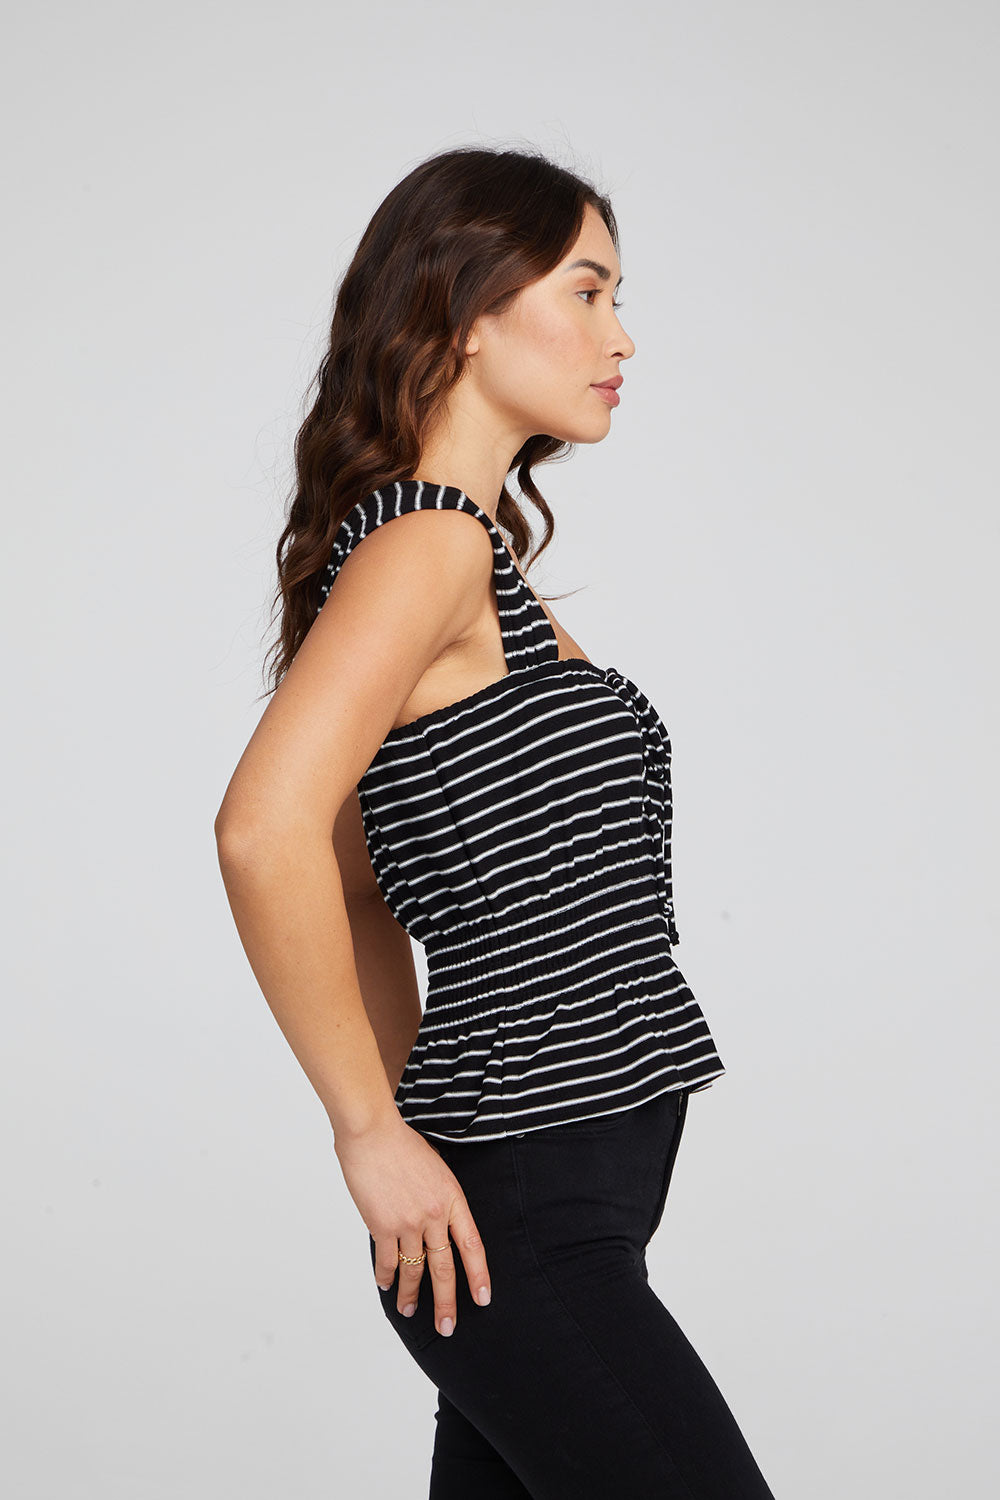 Bayshore Tank Top - Black and White Stripe WOMENS chaserbrand